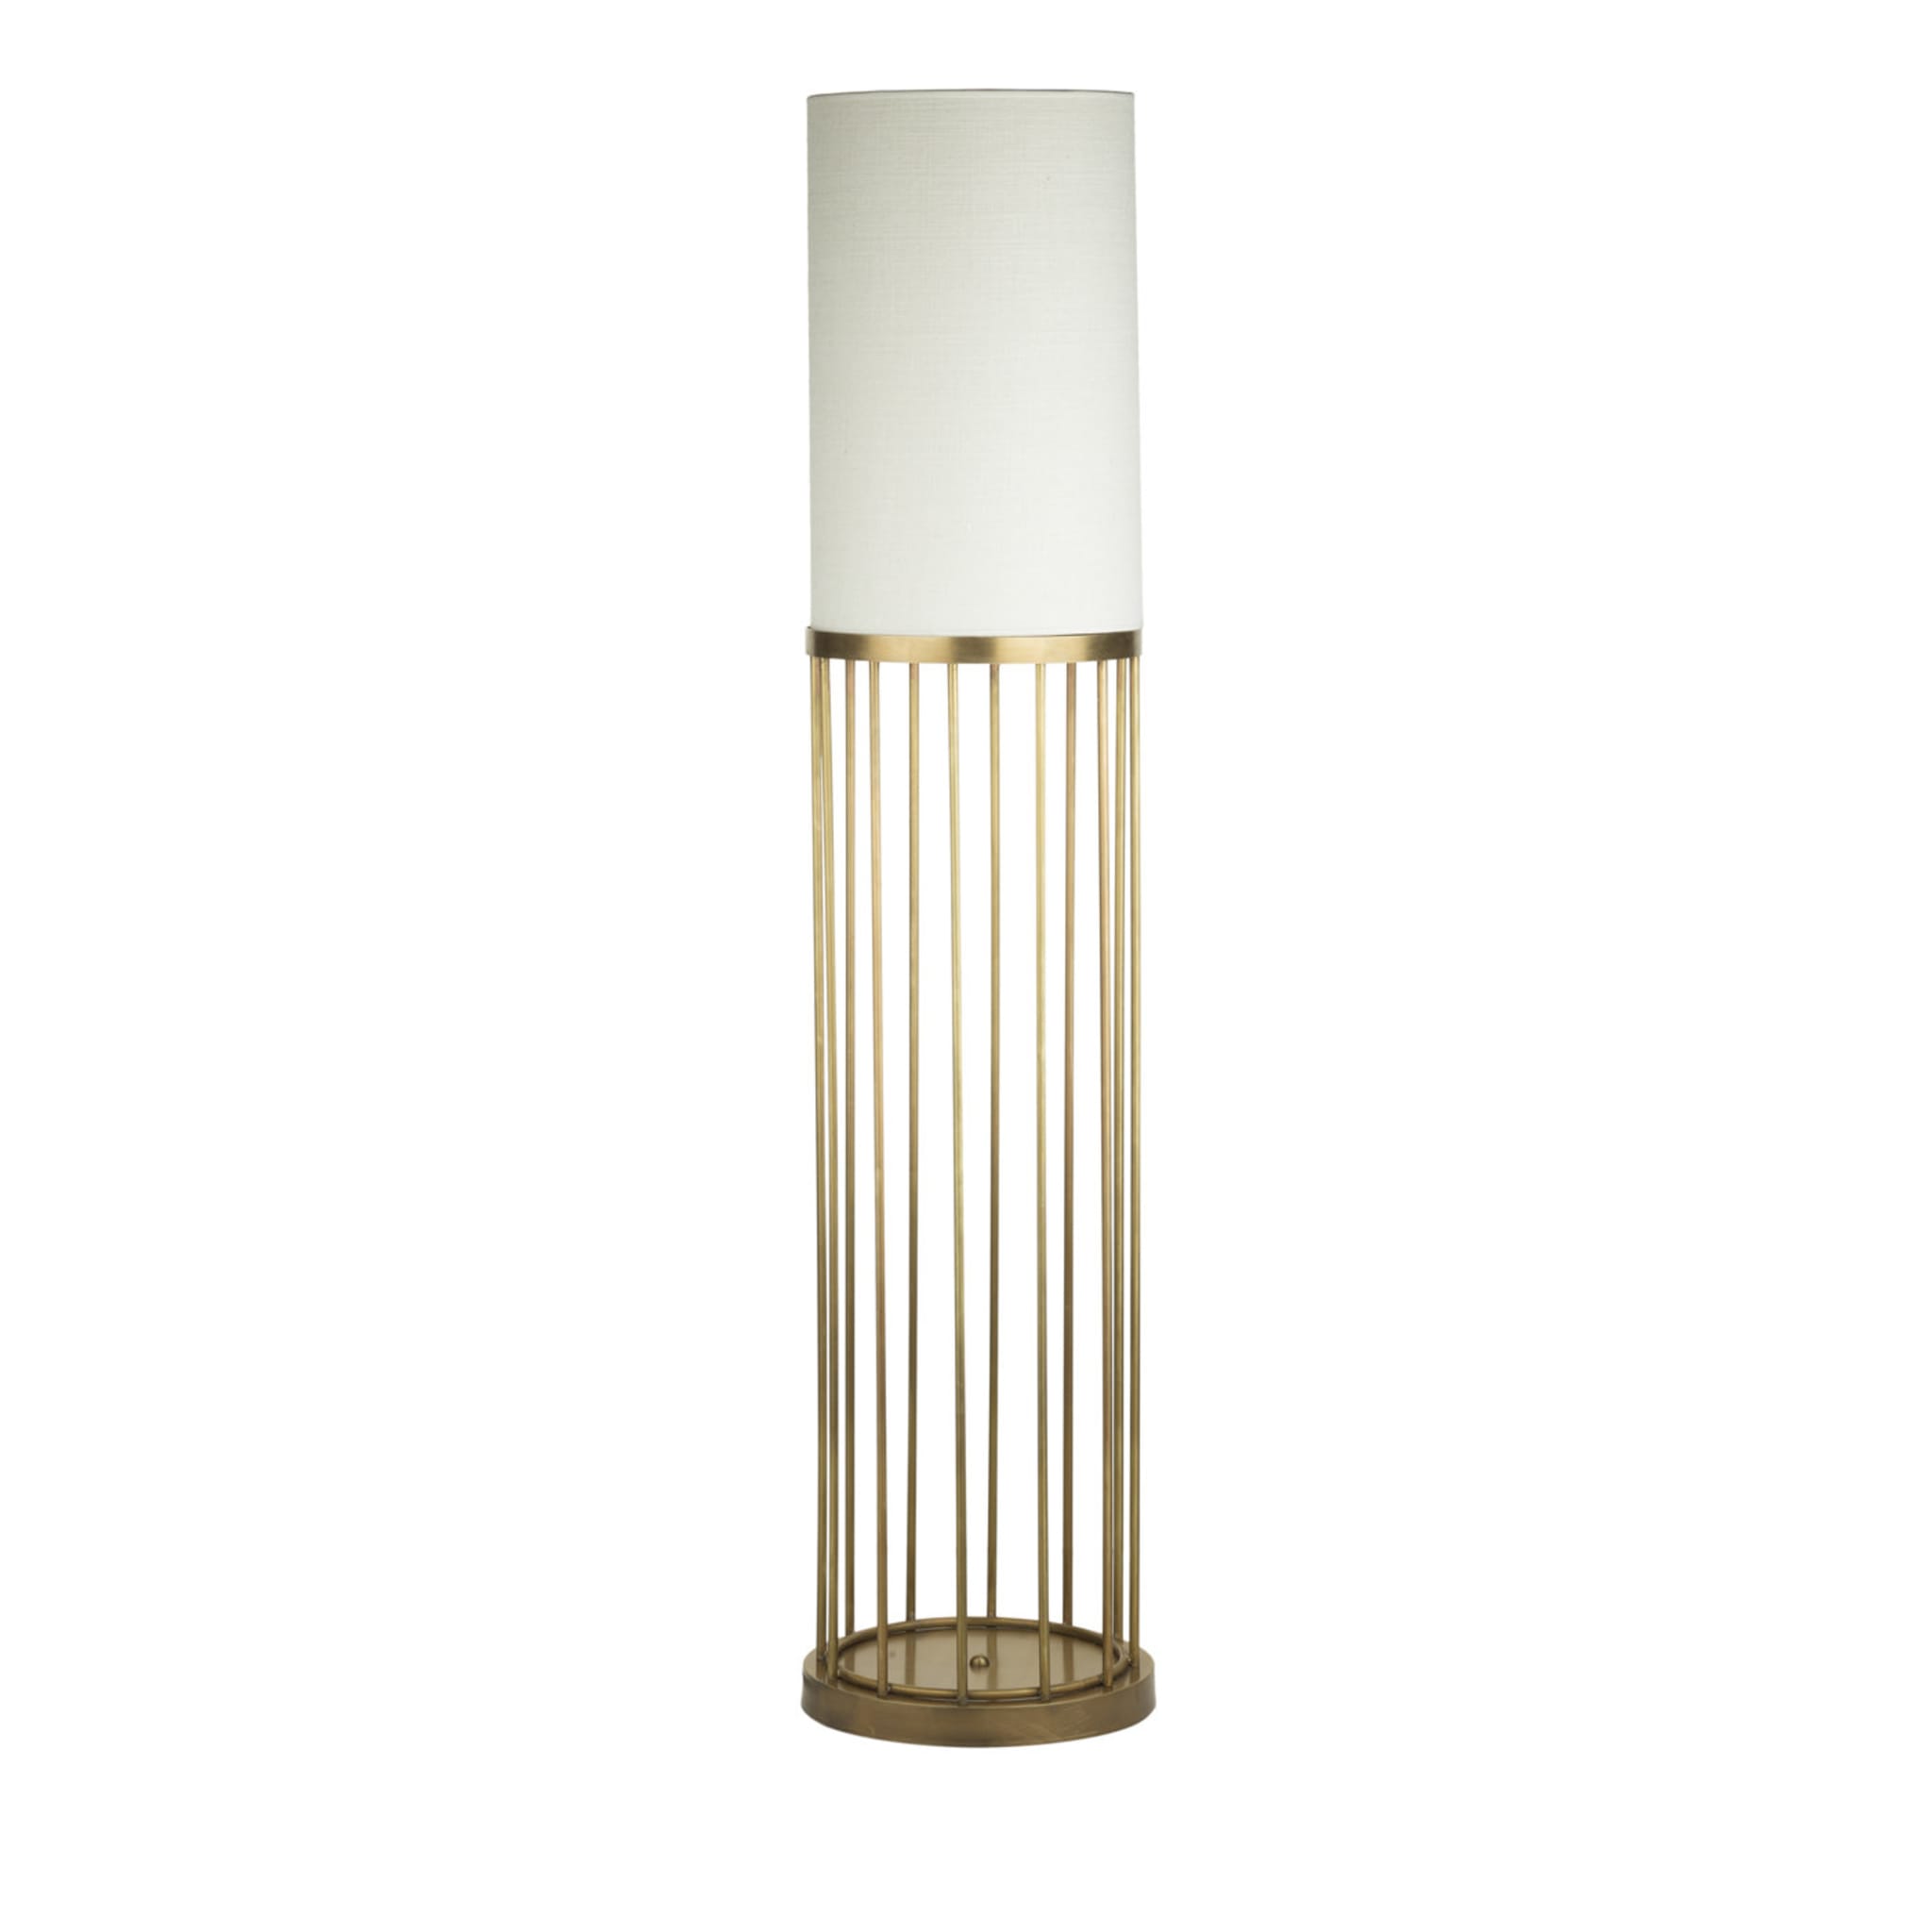 Cage 2 Floor Lamp - Main view